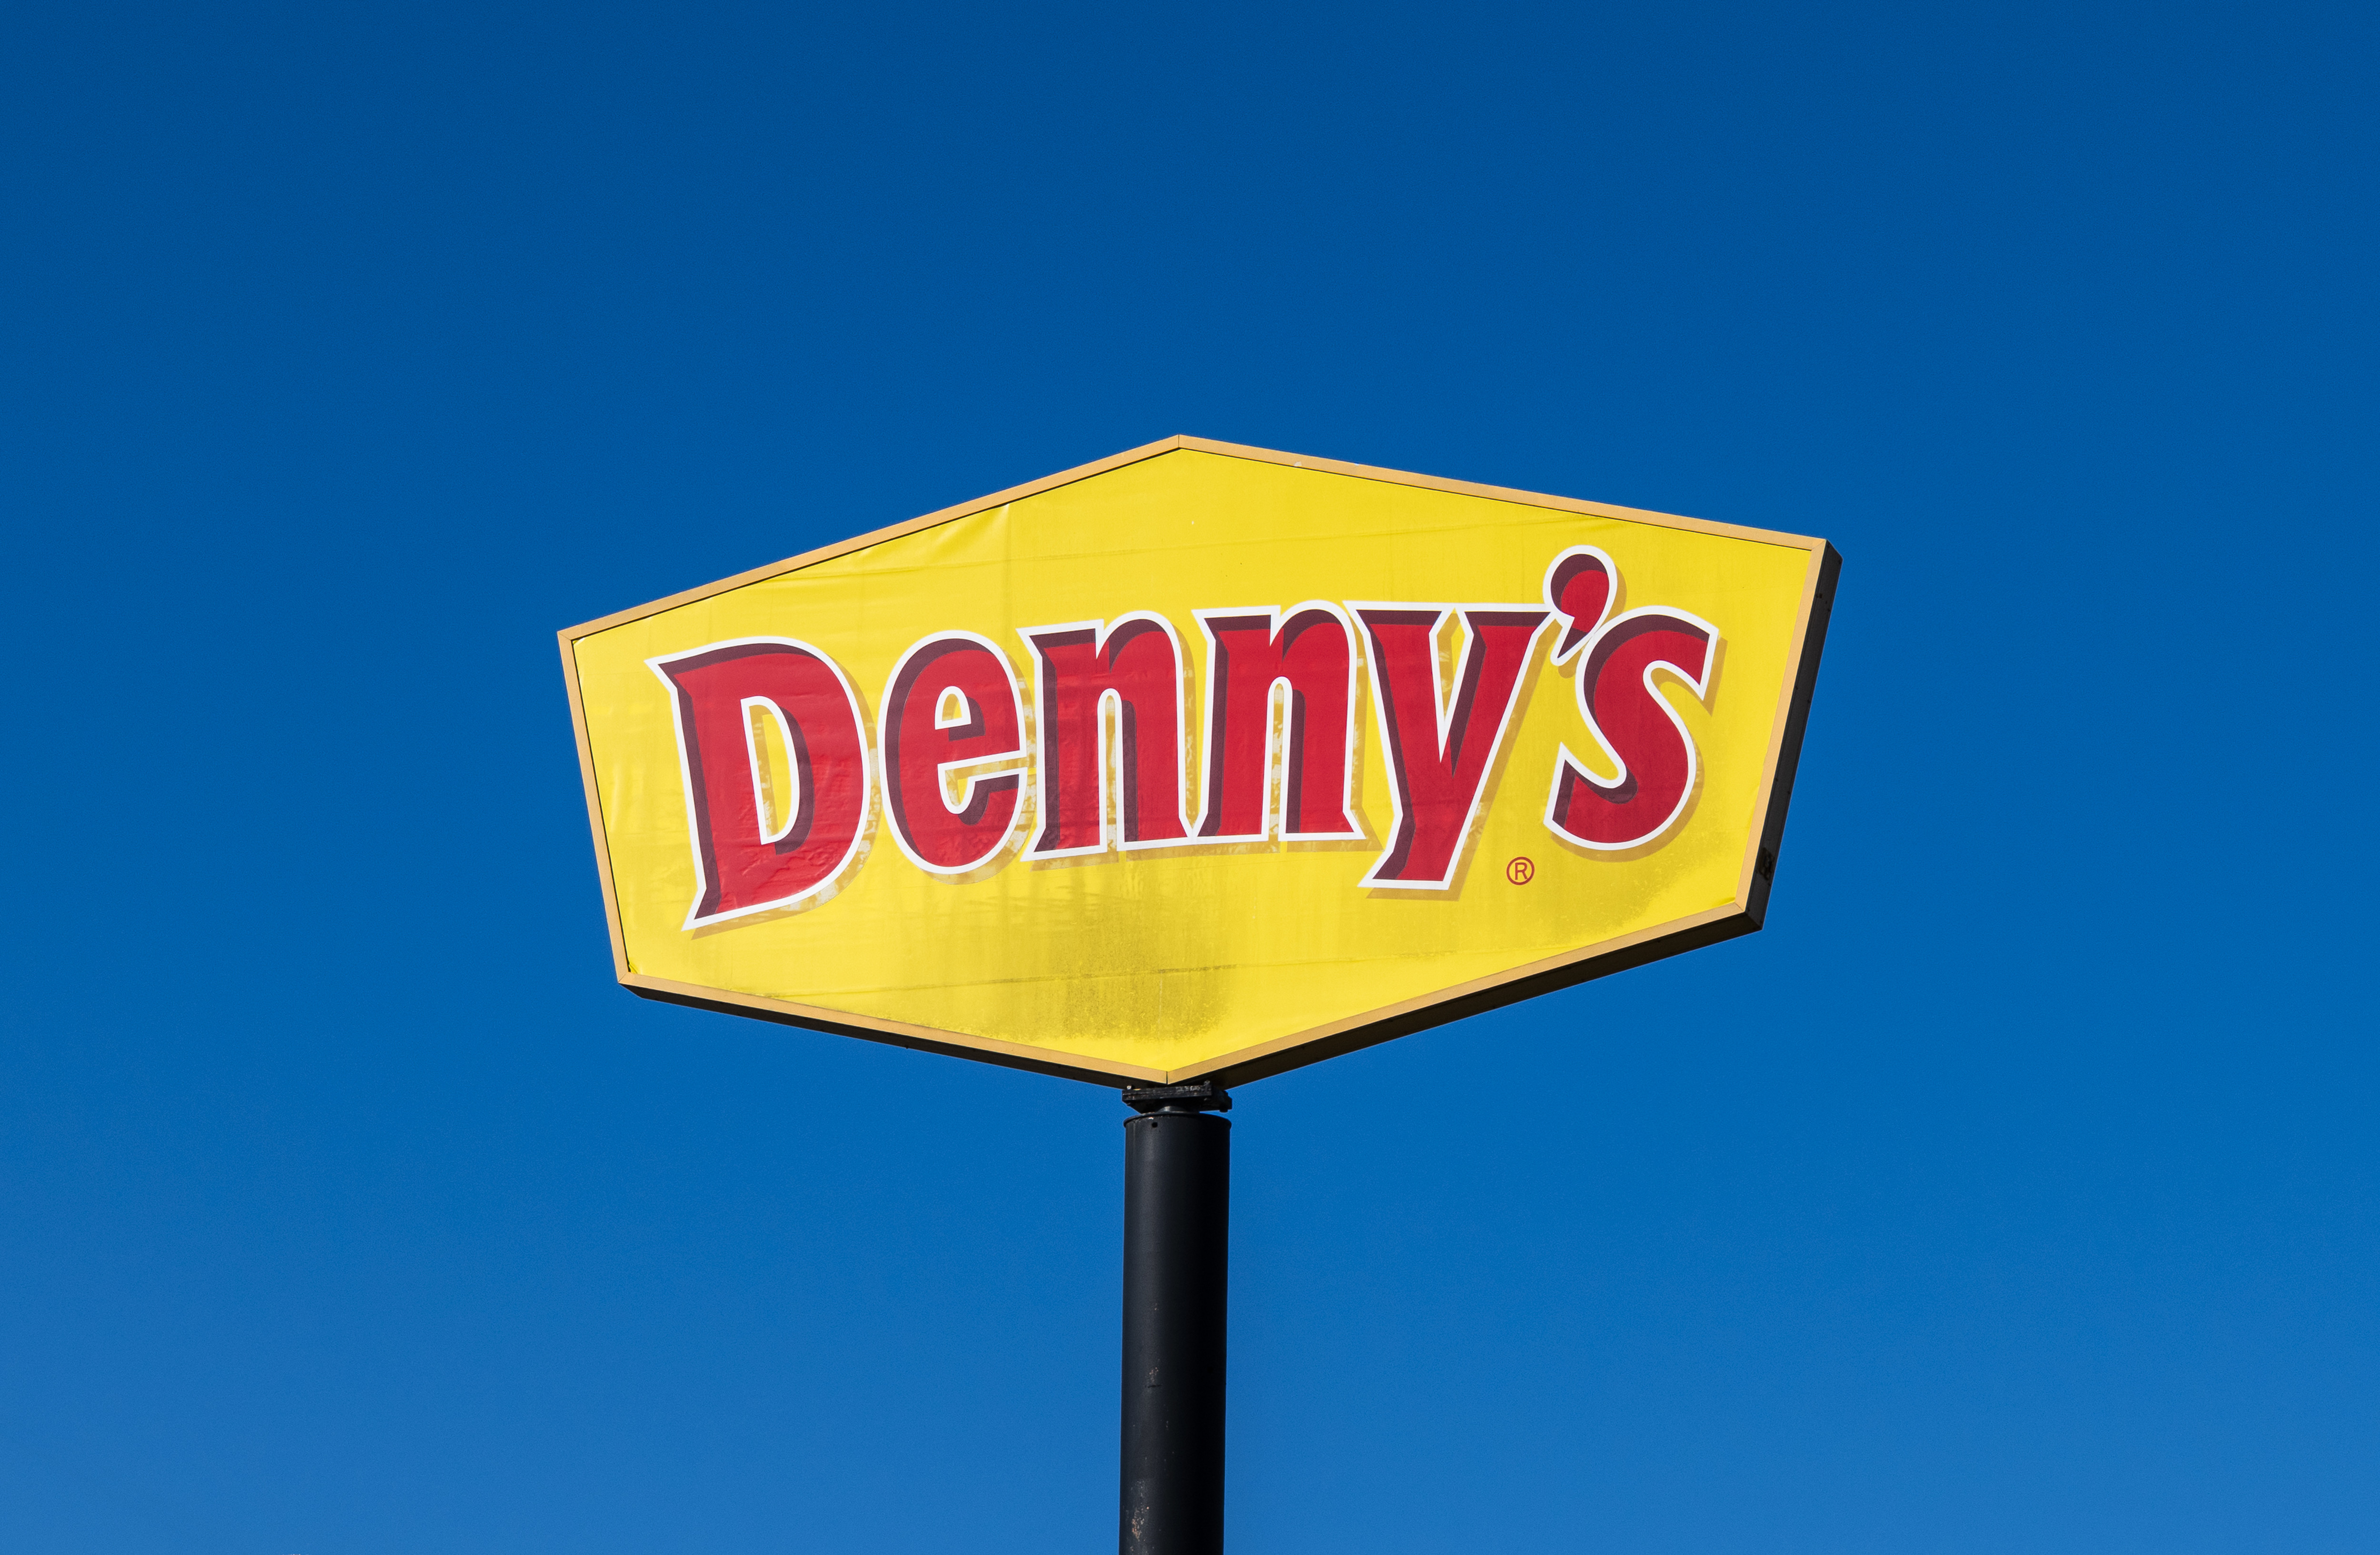 Denny's Shirt Deal: How to Get Free Breakfast for a Year – NBC Los Angeles